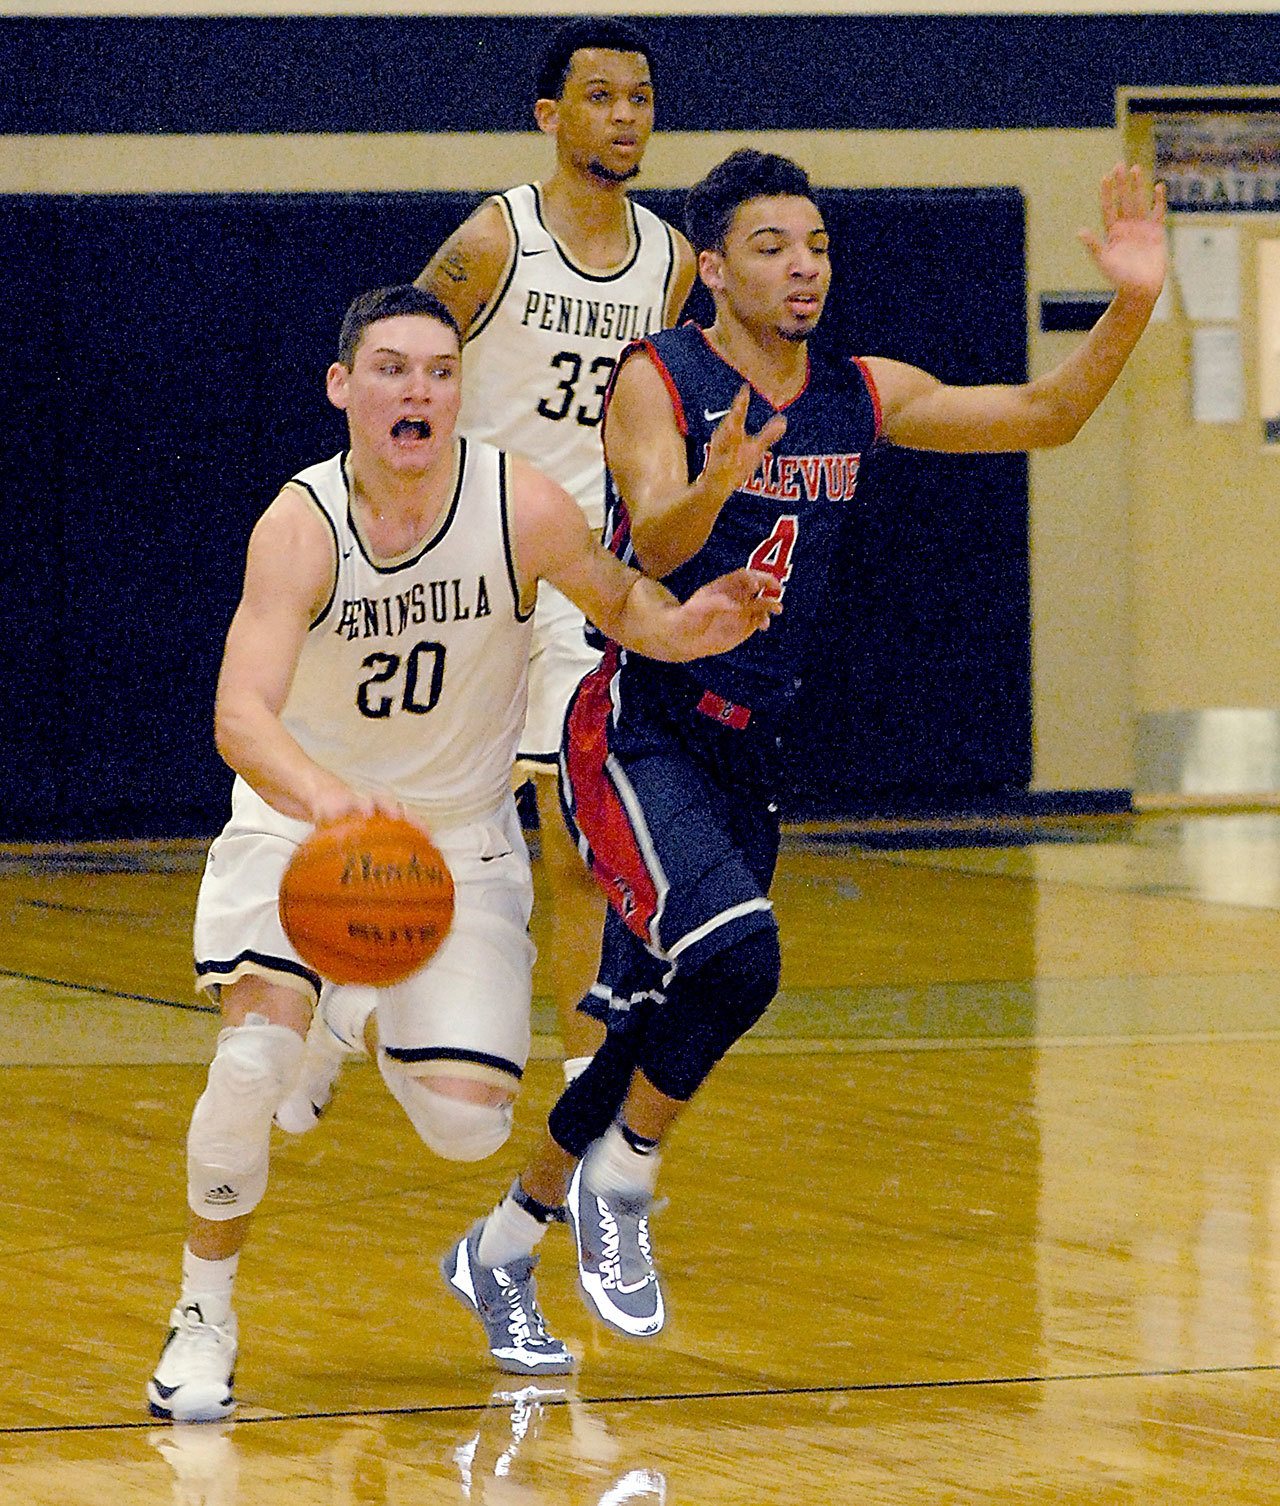 Keith Thorpe/Peninsula Daily News                                Peninsula’s Cole Rabedeaux, left, drives downcourt in front of Bellevue’s Trey Nelson in the first half on Saturday in Port Angeles. Following behind is Peninsula’s Kevin Baker.